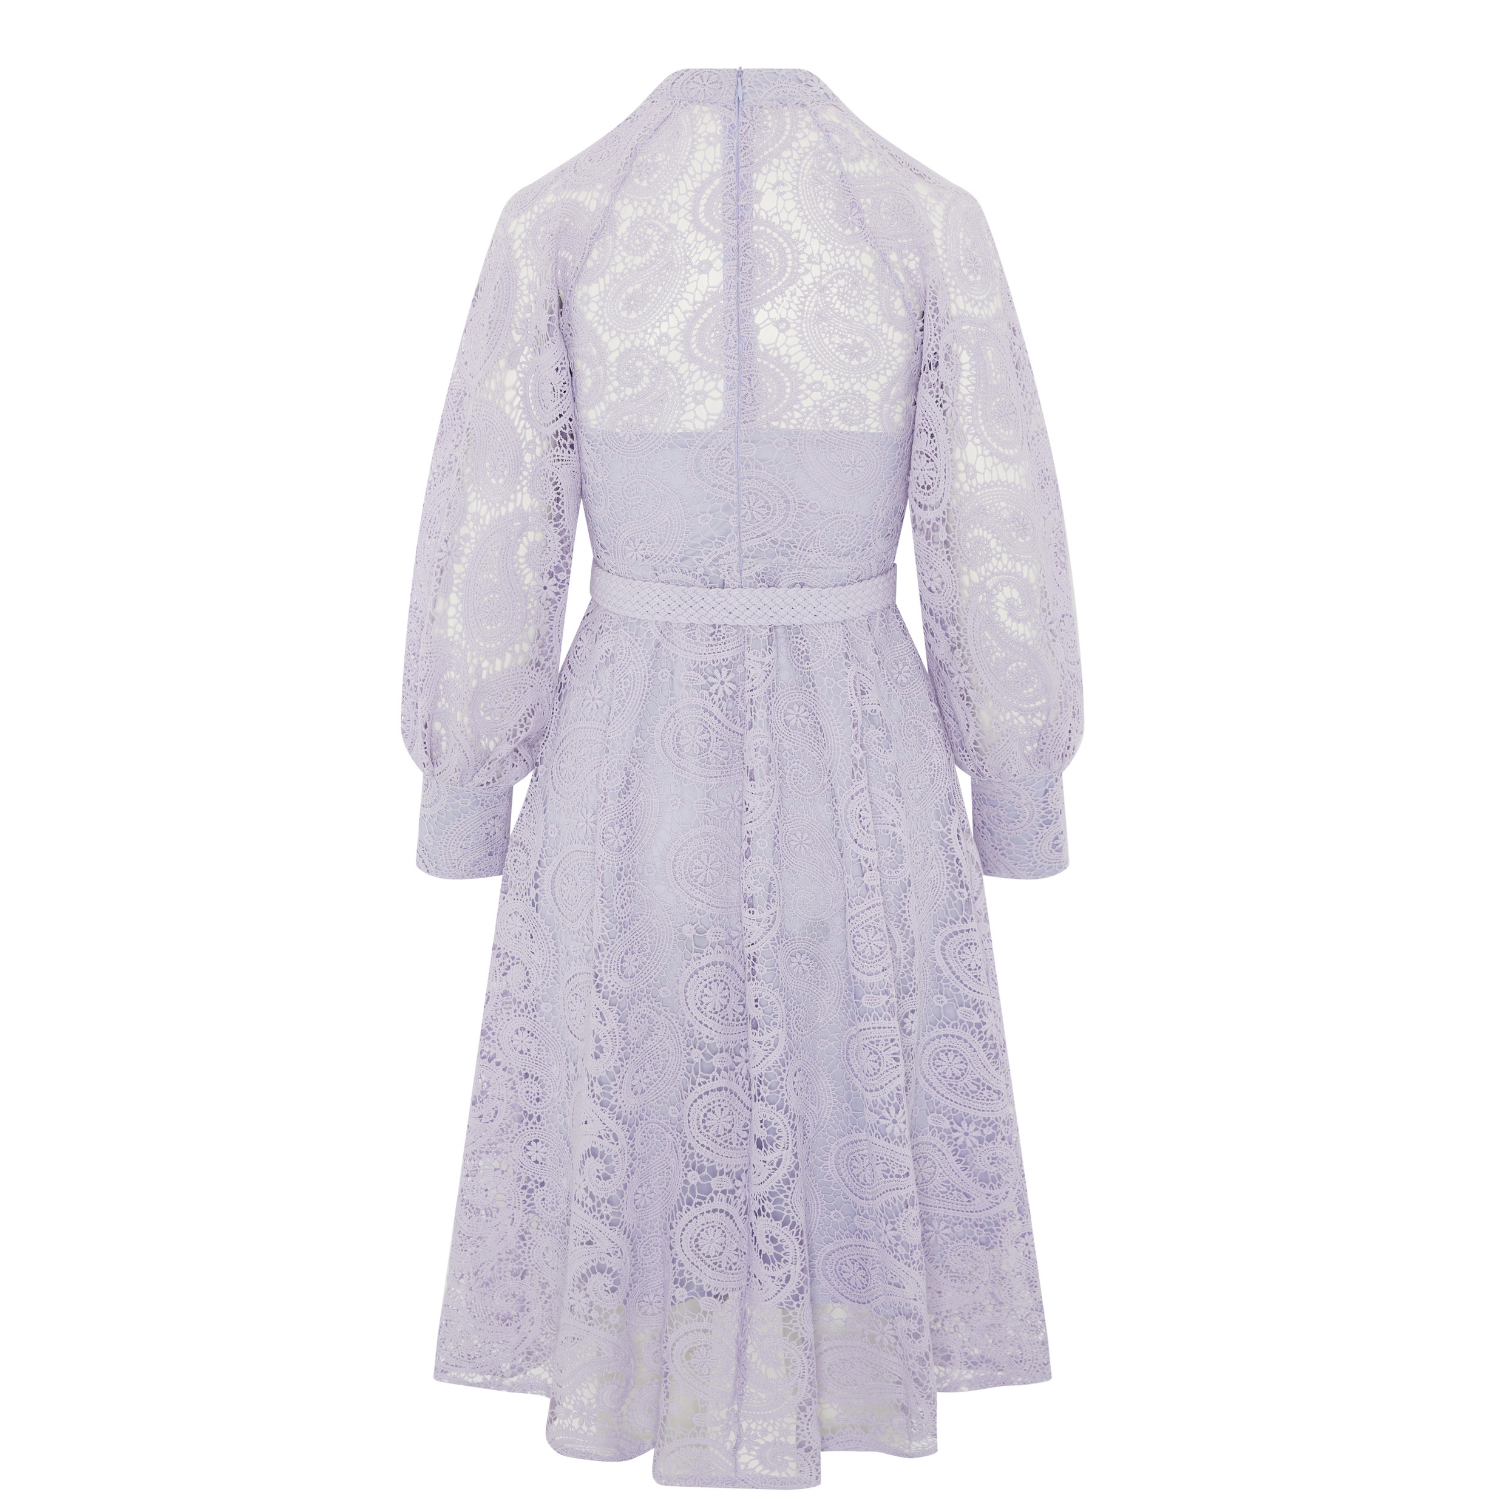 PAISLEY CROCHET LACE MIDAXI WITH LANTERN SLEEVES AND BRAIDED BELT - LIGHT PURPLE